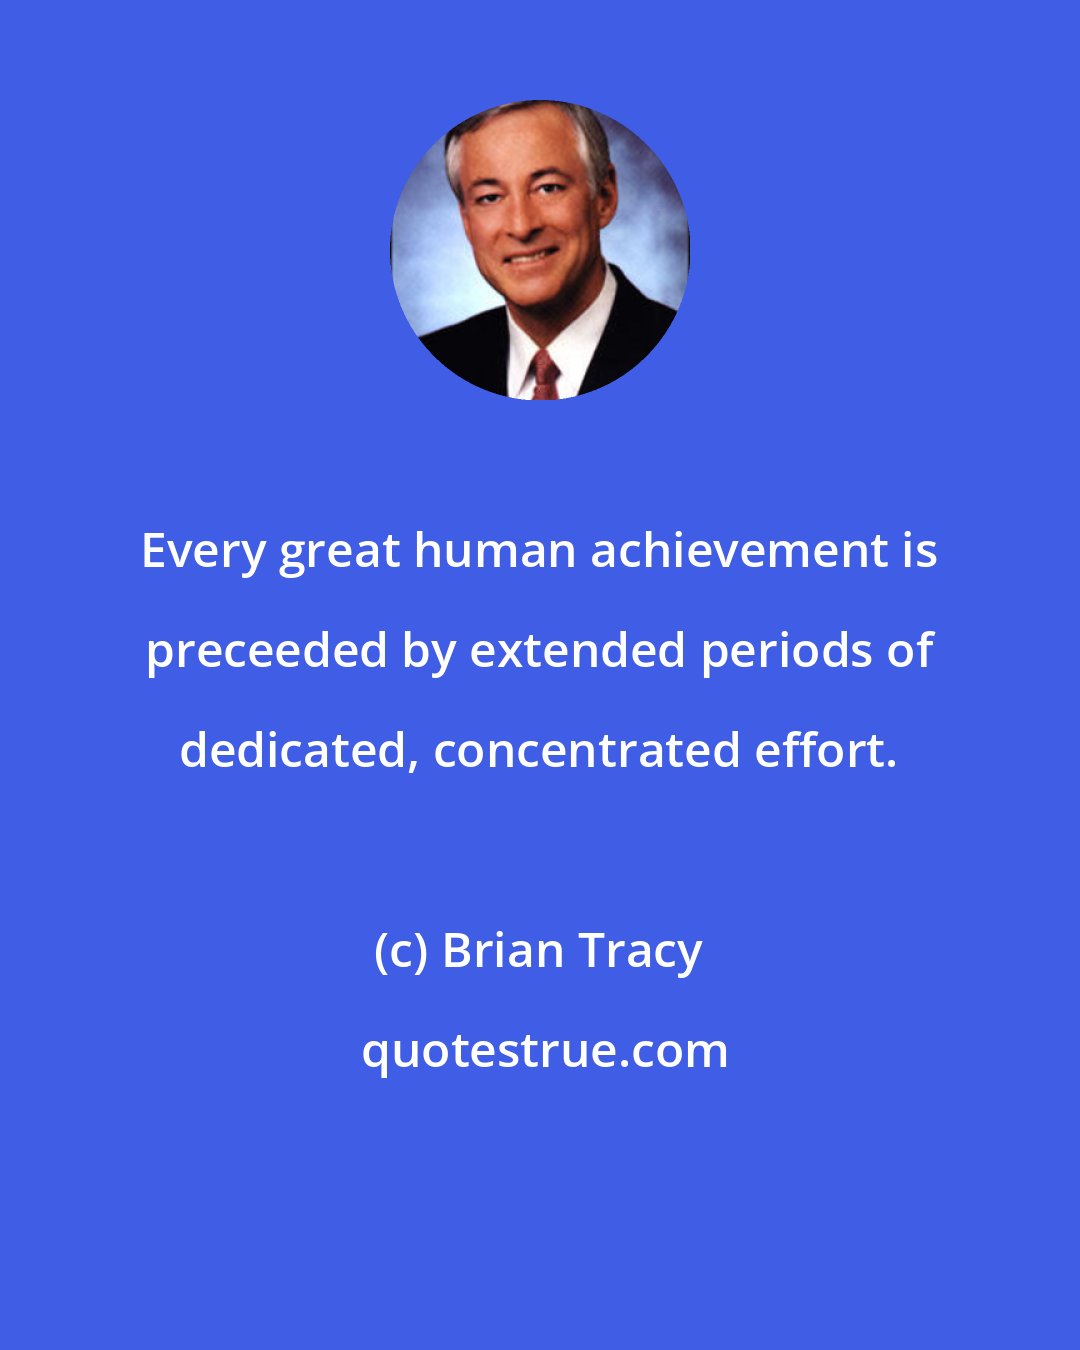 Brian Tracy: Every great human achievement is preceeded by extended periods of dedicated, concentrated effort.